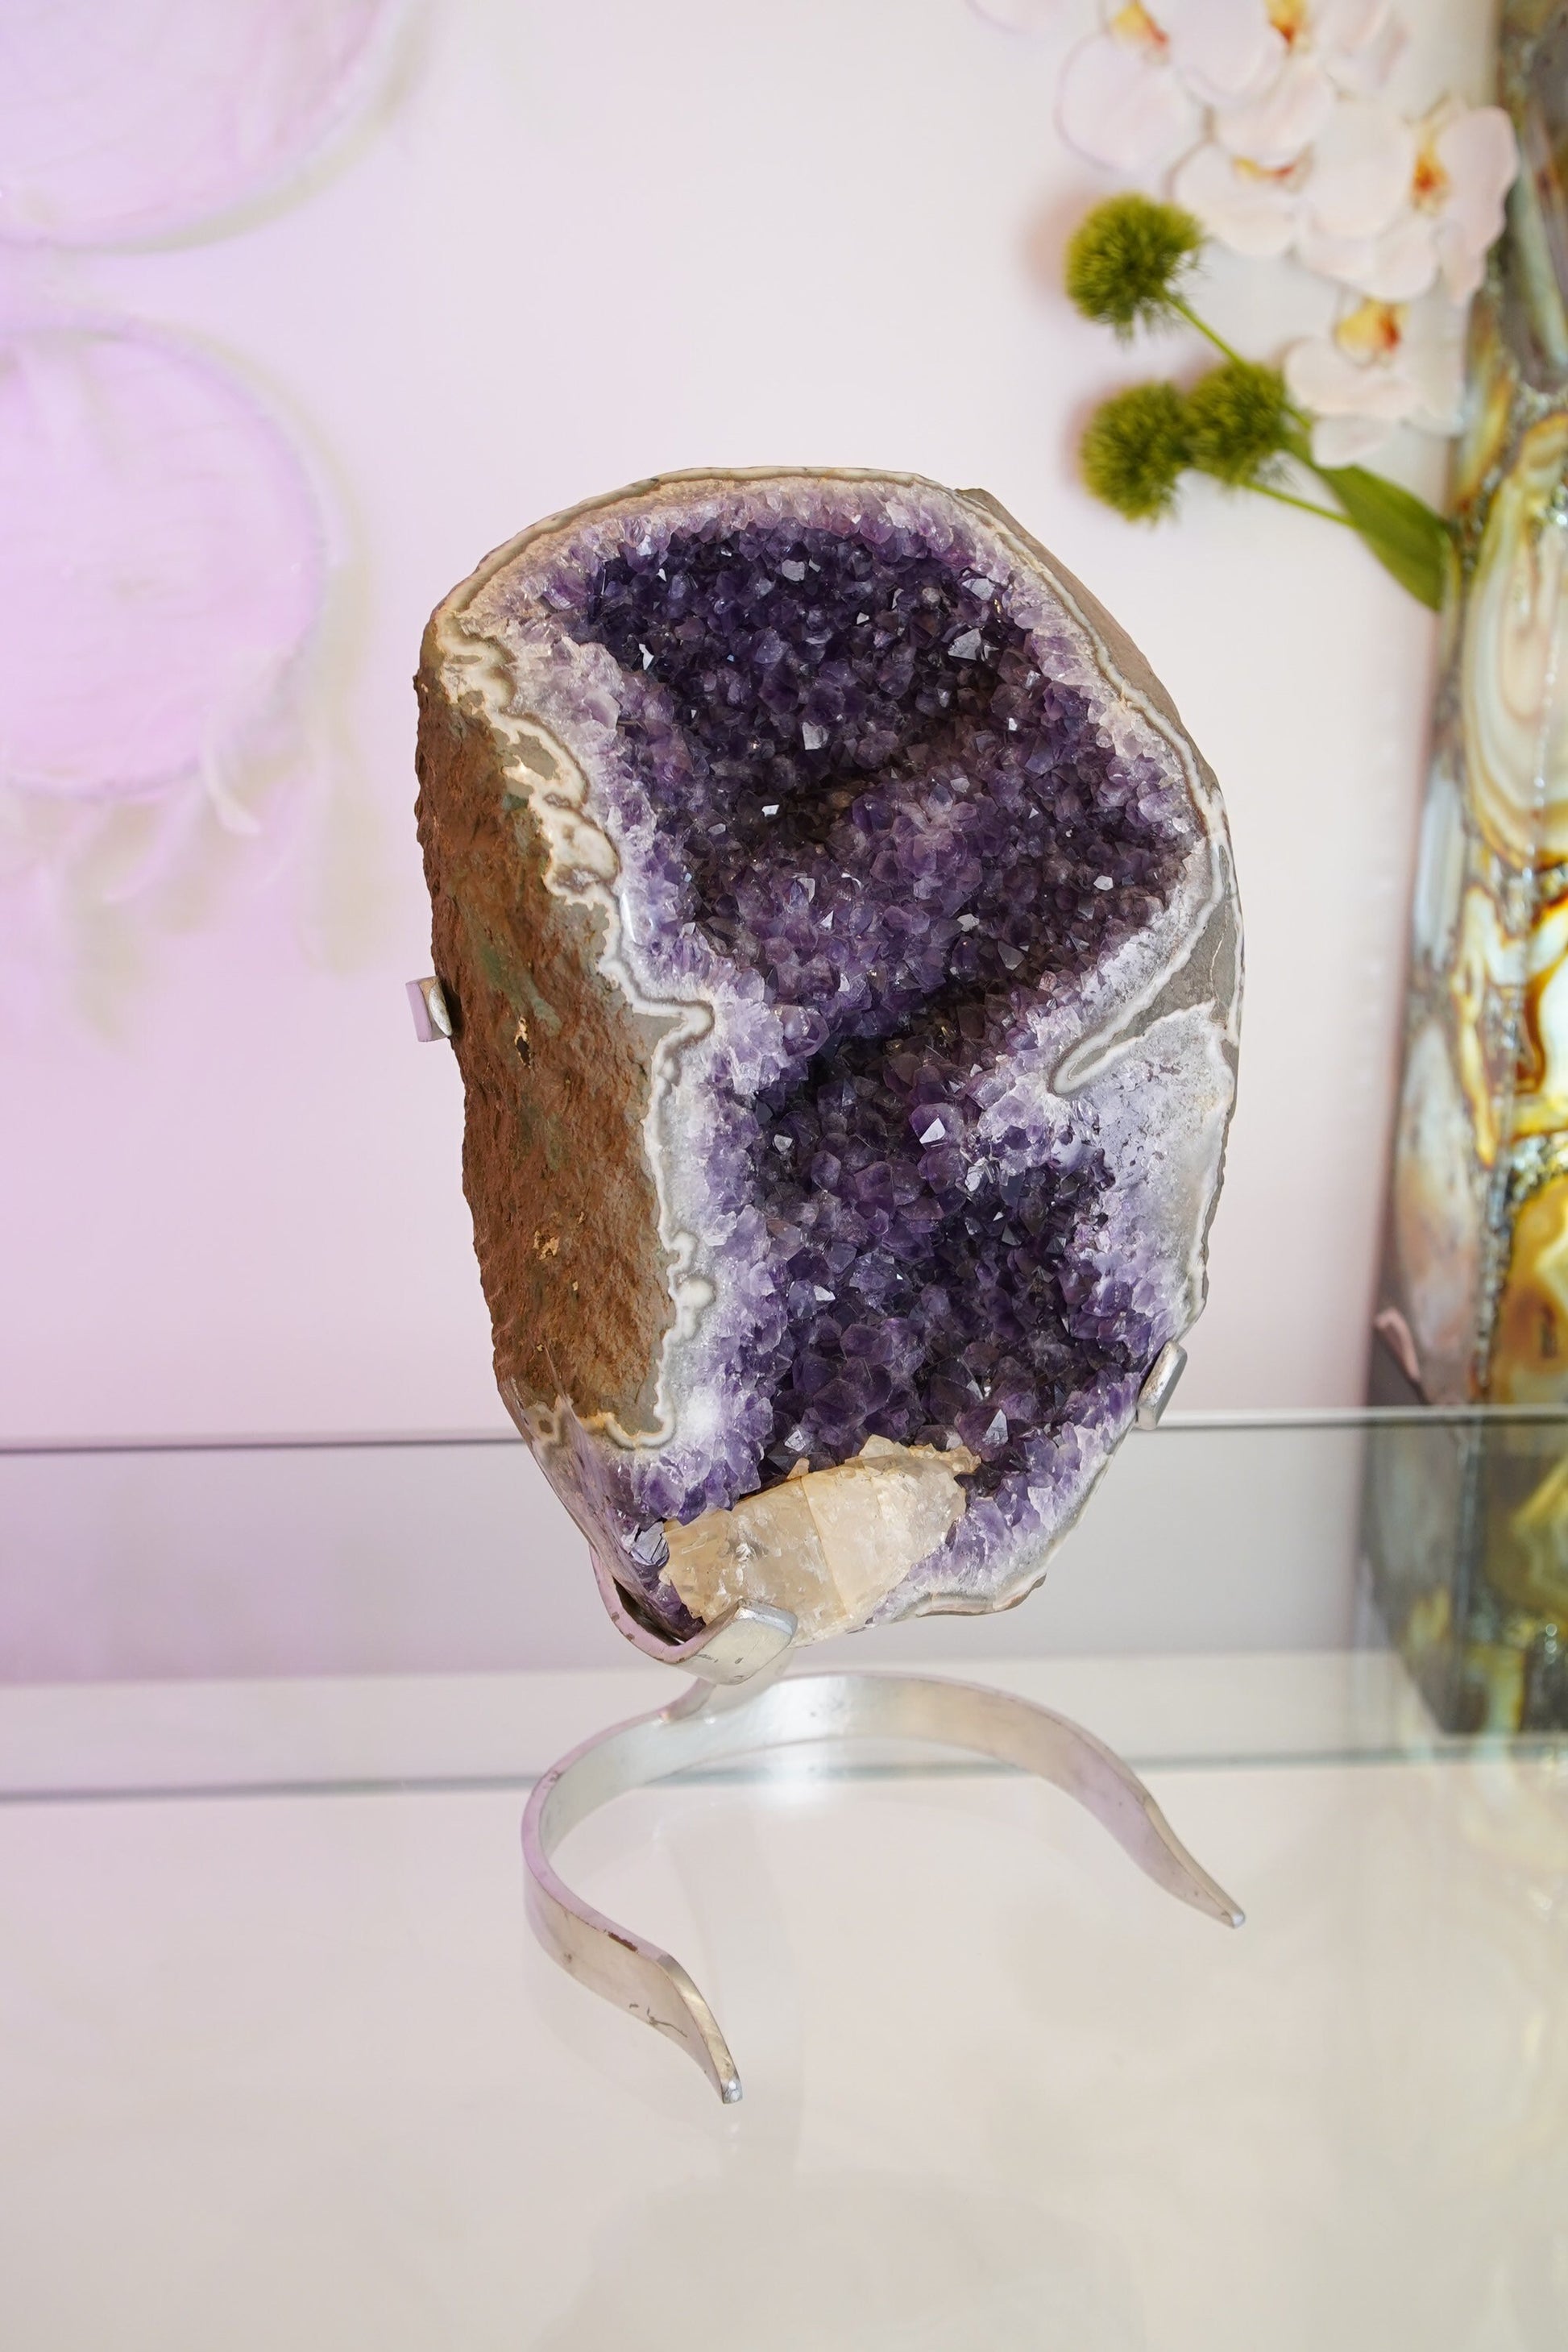 Large Amethyst Geode Crystal Natural self-standing rock for